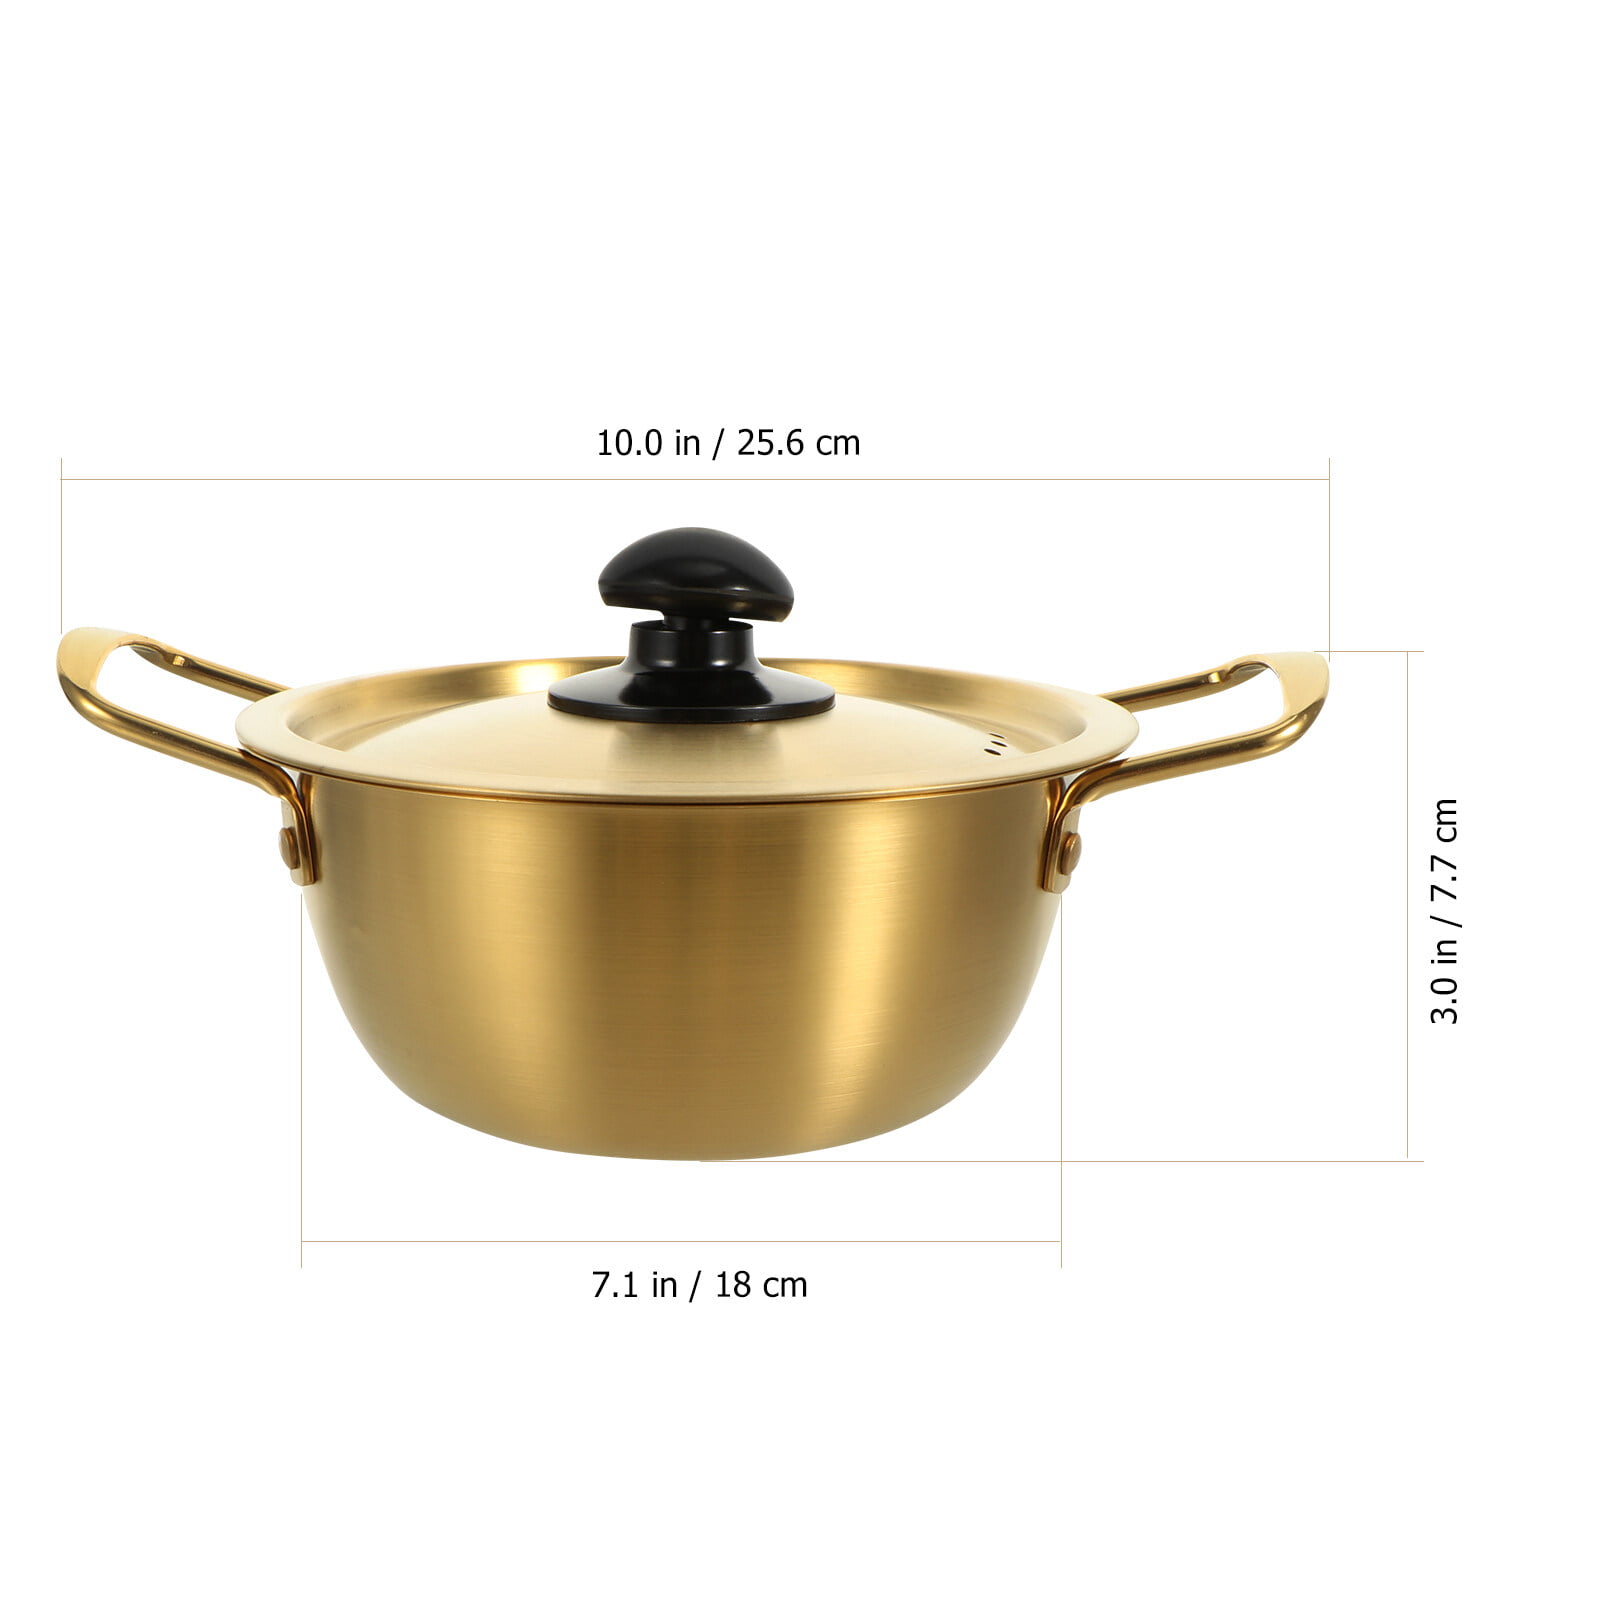 1pc Stainless Steel Covered Small Cooking Pot, Instant Noodle Pot,  Multi-purpose Kitchen Cookware, Small Pot, Soup Pot, Frying Pan, Deep  Fryer, Cookin